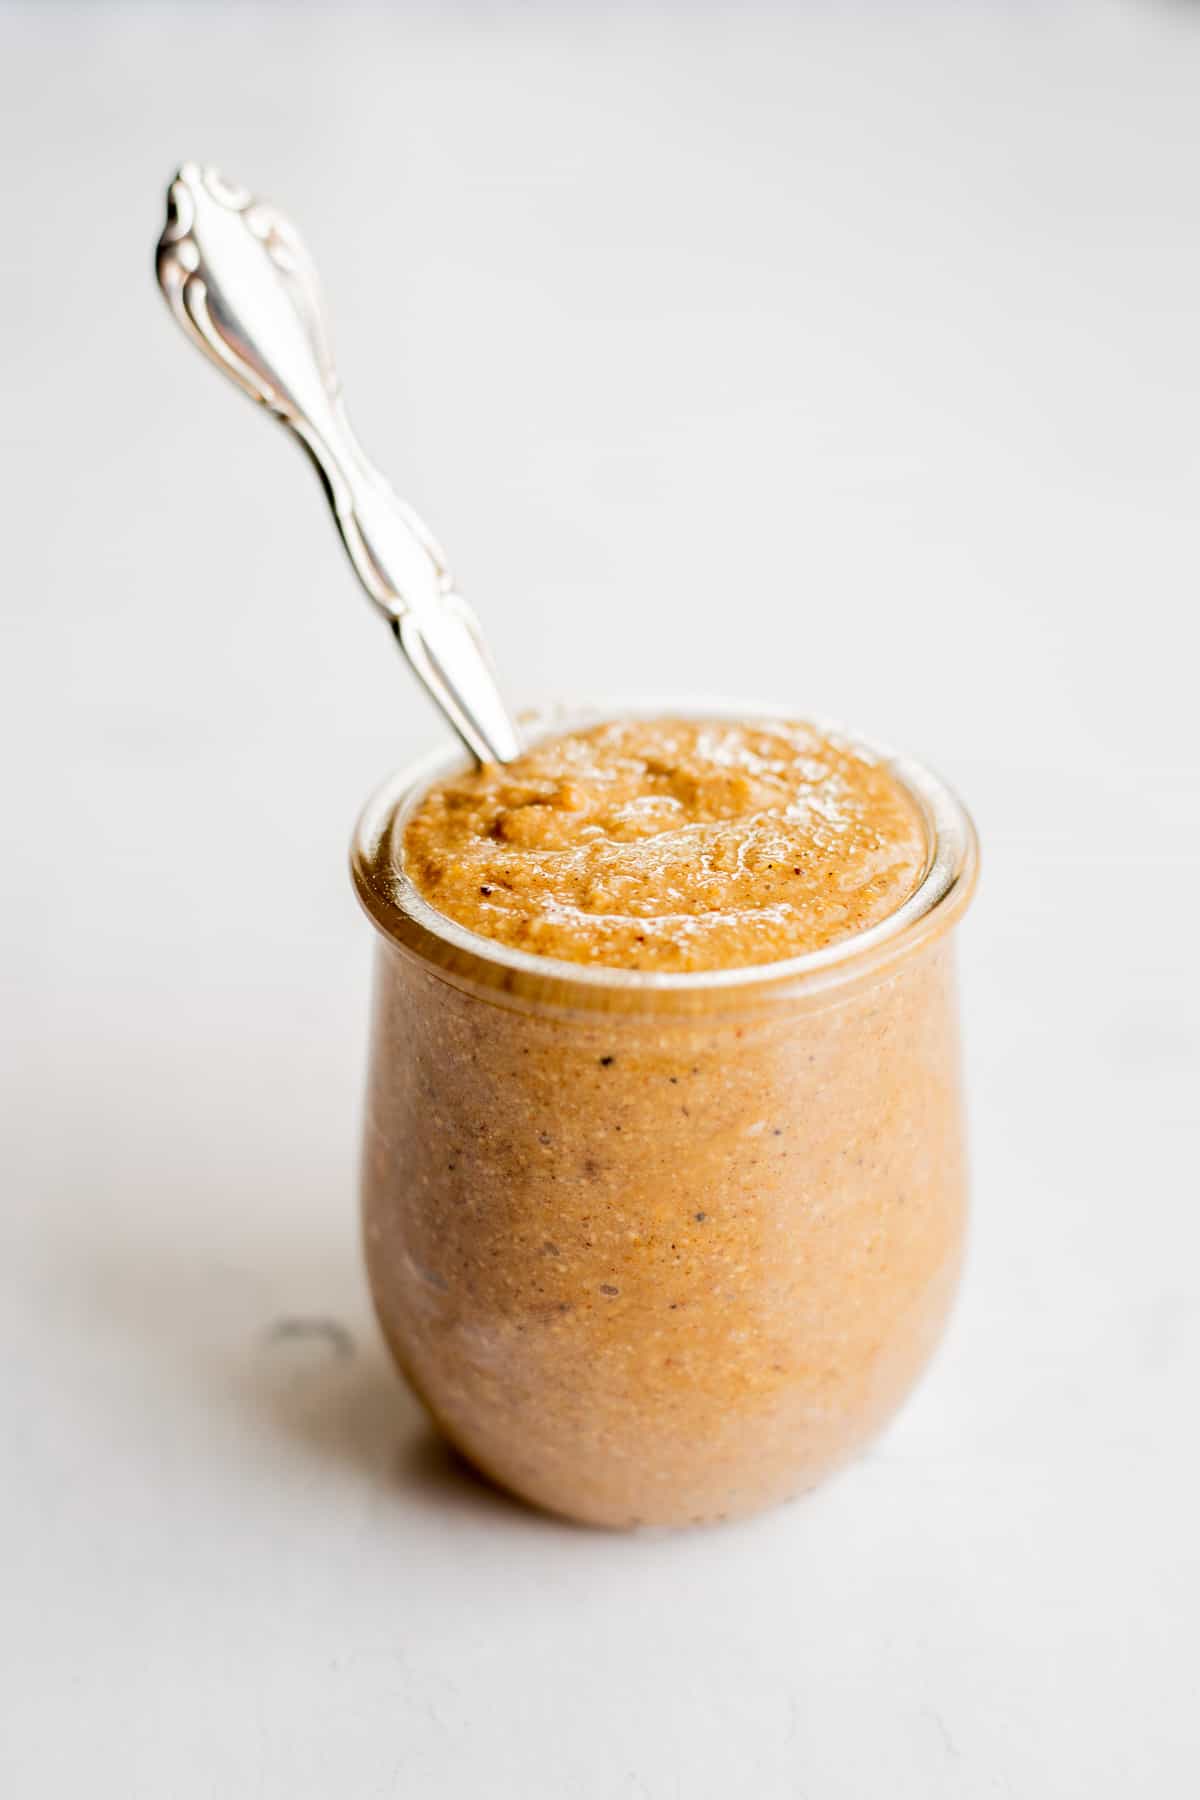 glass jar of oat spread with a silver spoon.